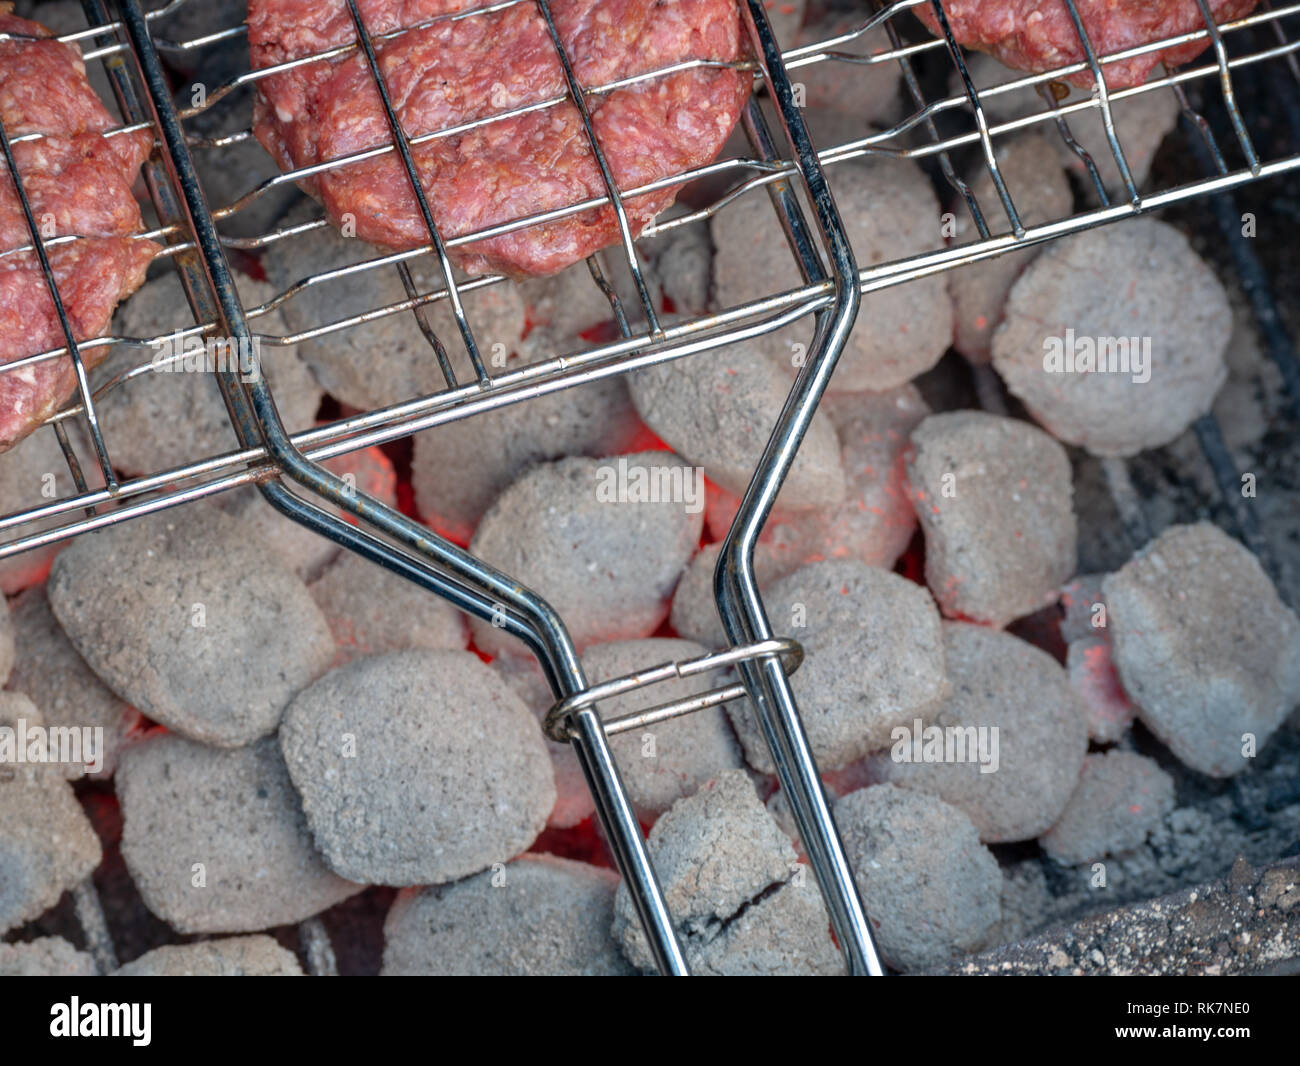 Image of bbq burger patties on grill Stock Photo